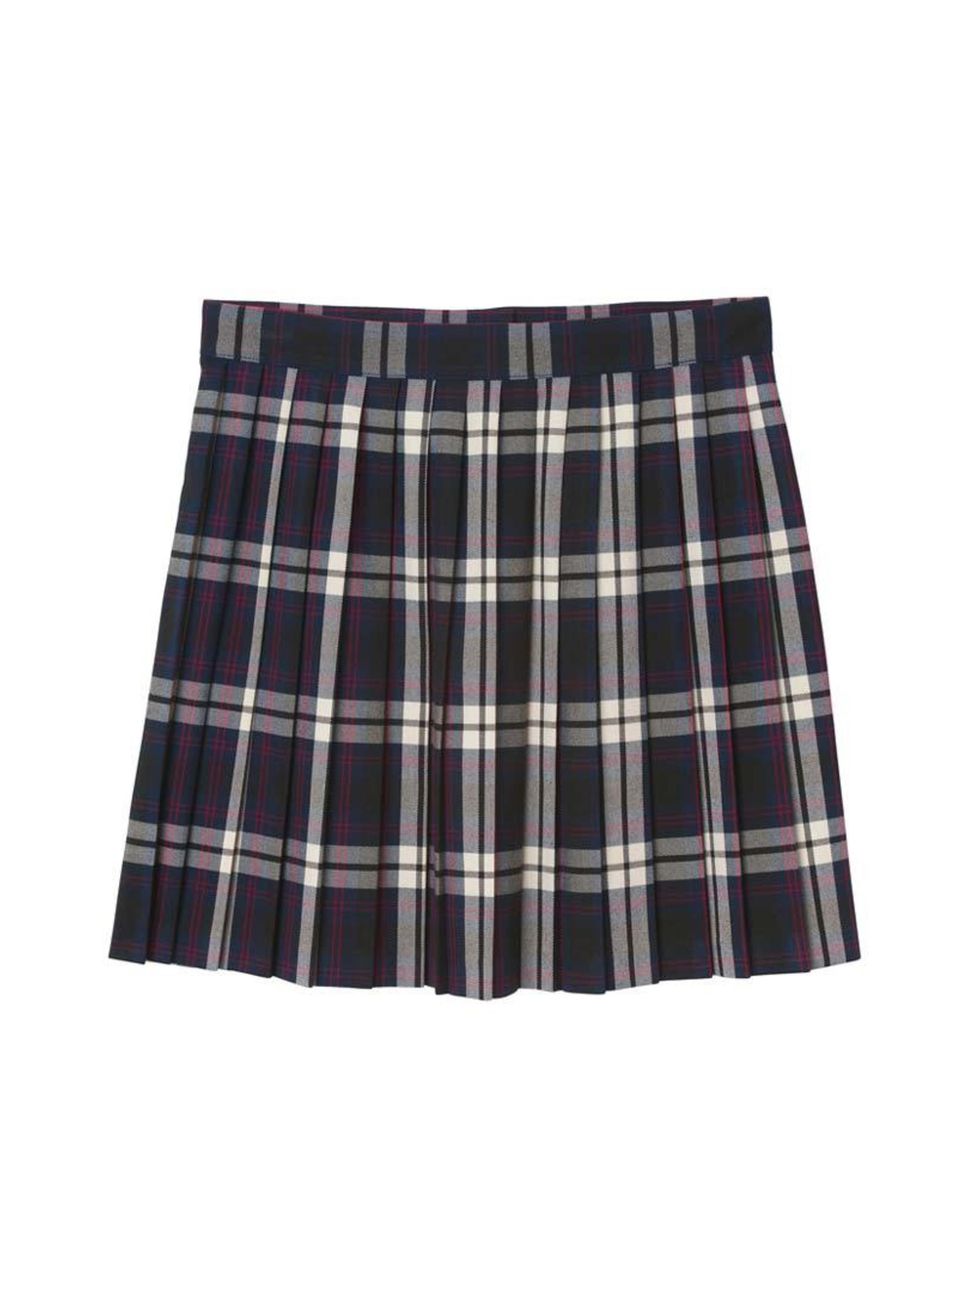 Perfect for showing off Market & Retail Editor Harriet Stewart's enviably tanned legs (boo, hiss). 

Monki skirt, £25